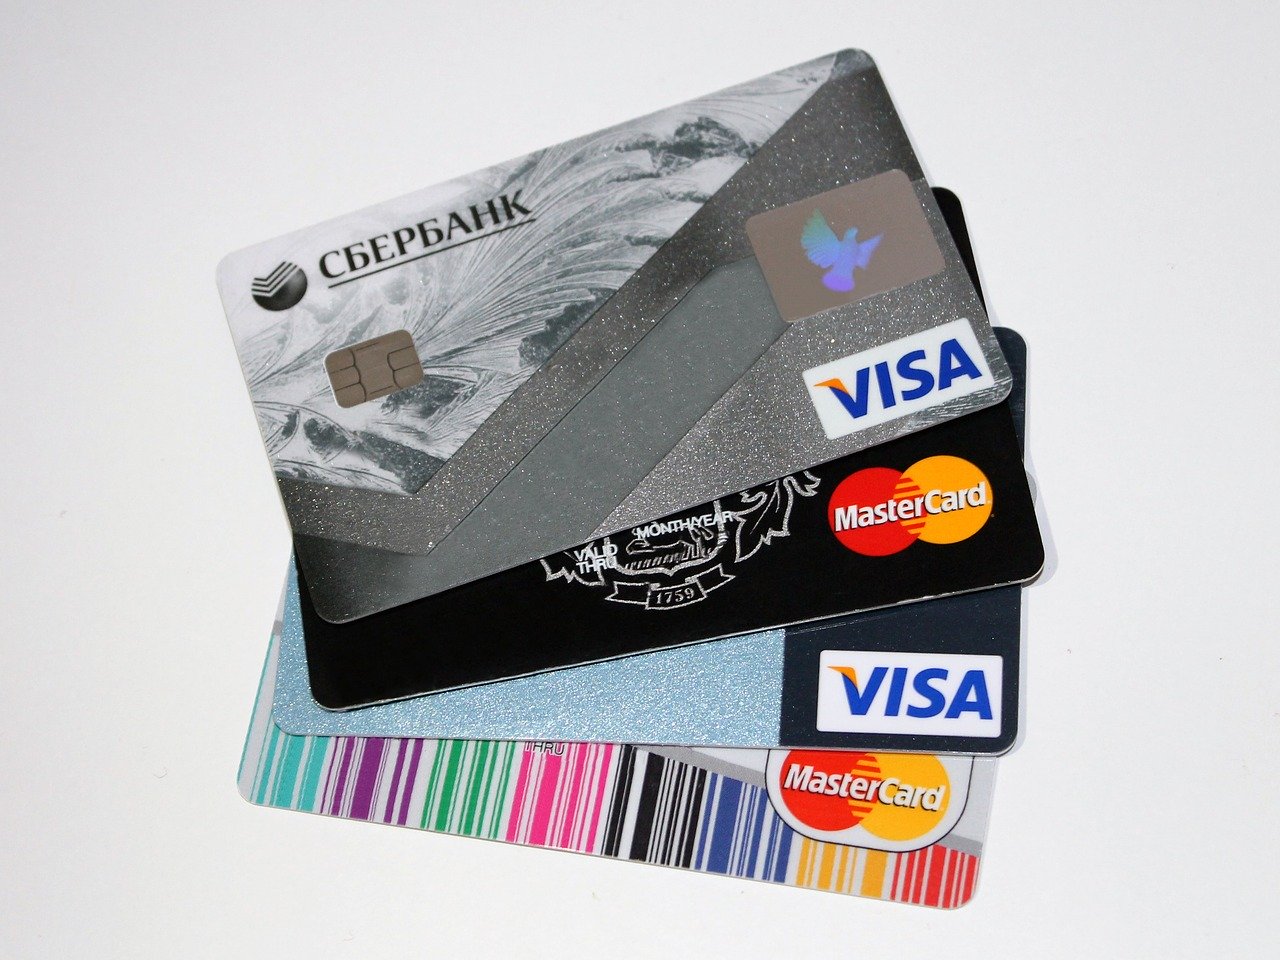 How to Avoid Getting Scammed with Credit Card Information